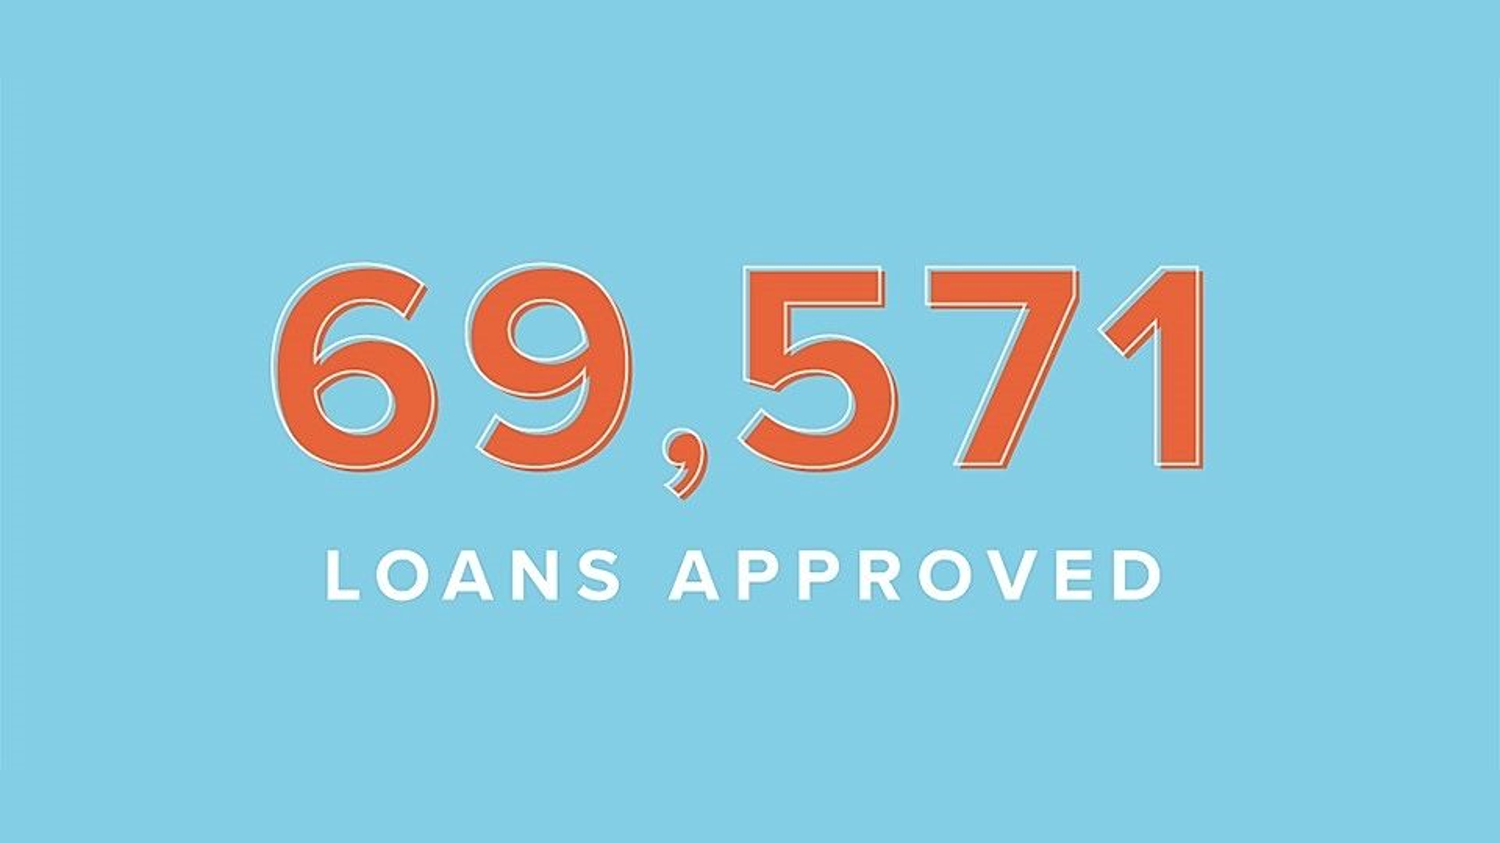 Bounce Back Loan Scheme – Over 69,000 loans approved in the first day